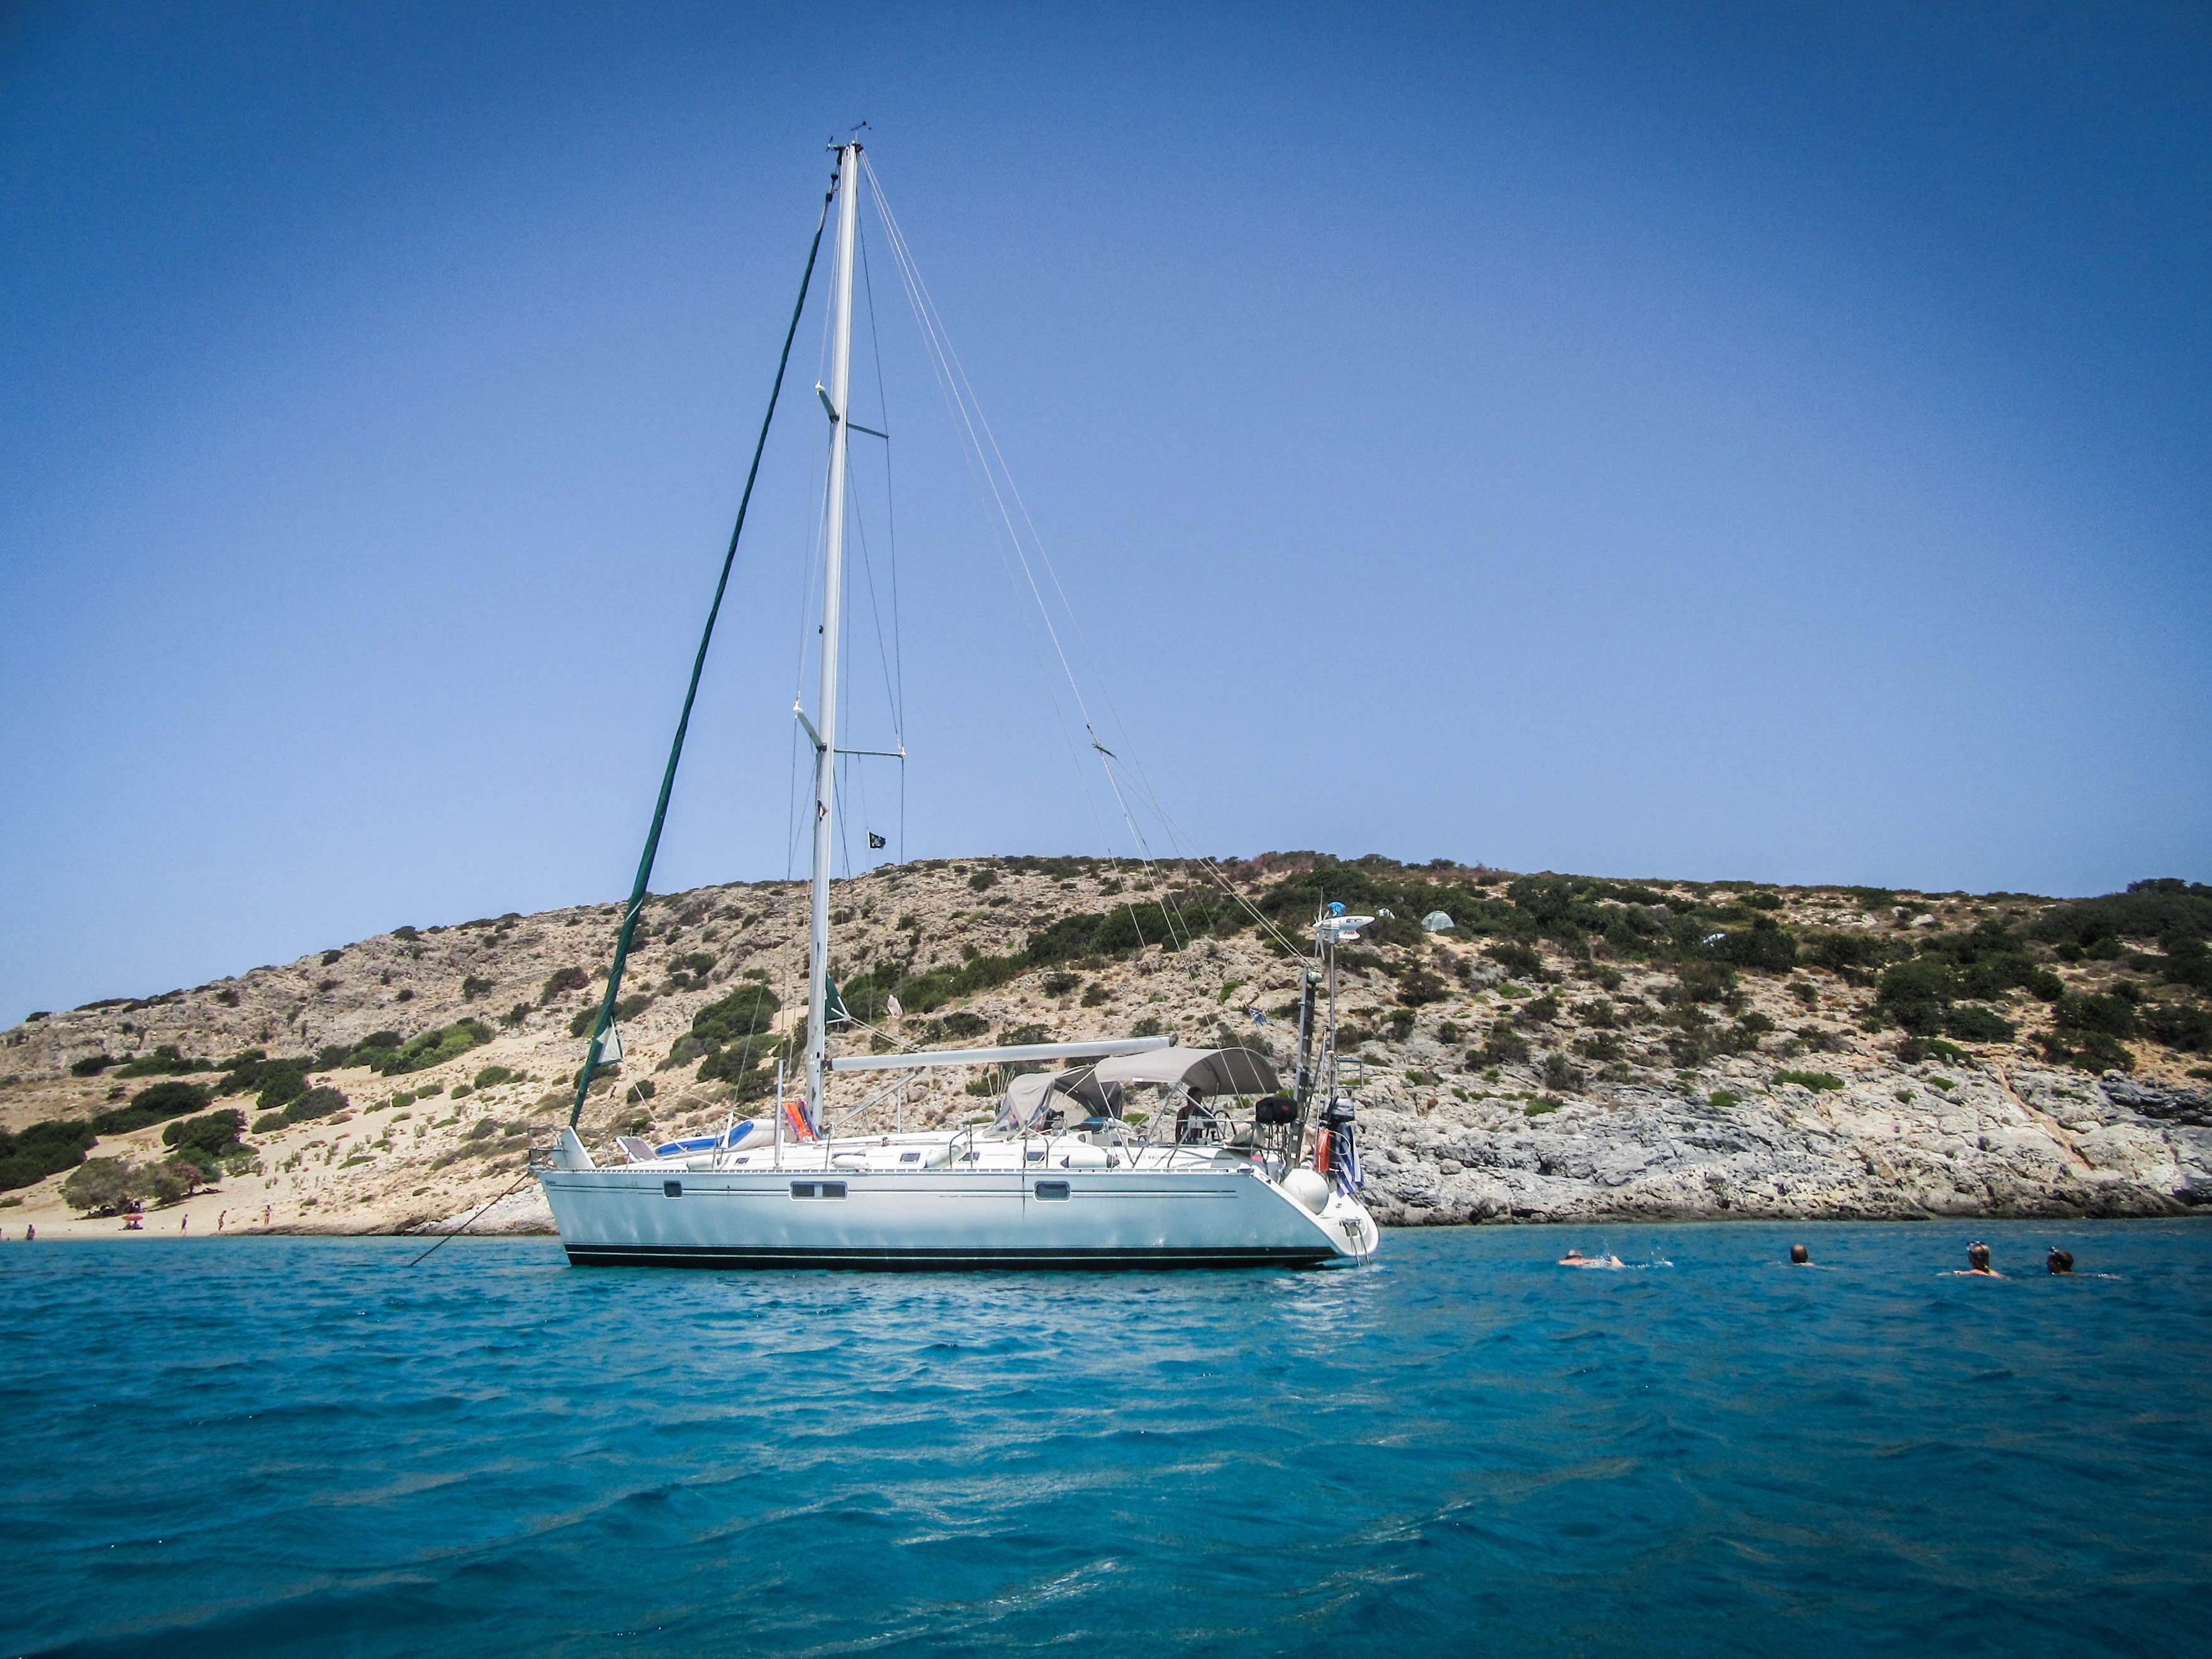 A general overview of Xanemo, with her wind generator, brand new spray hood and bimini.